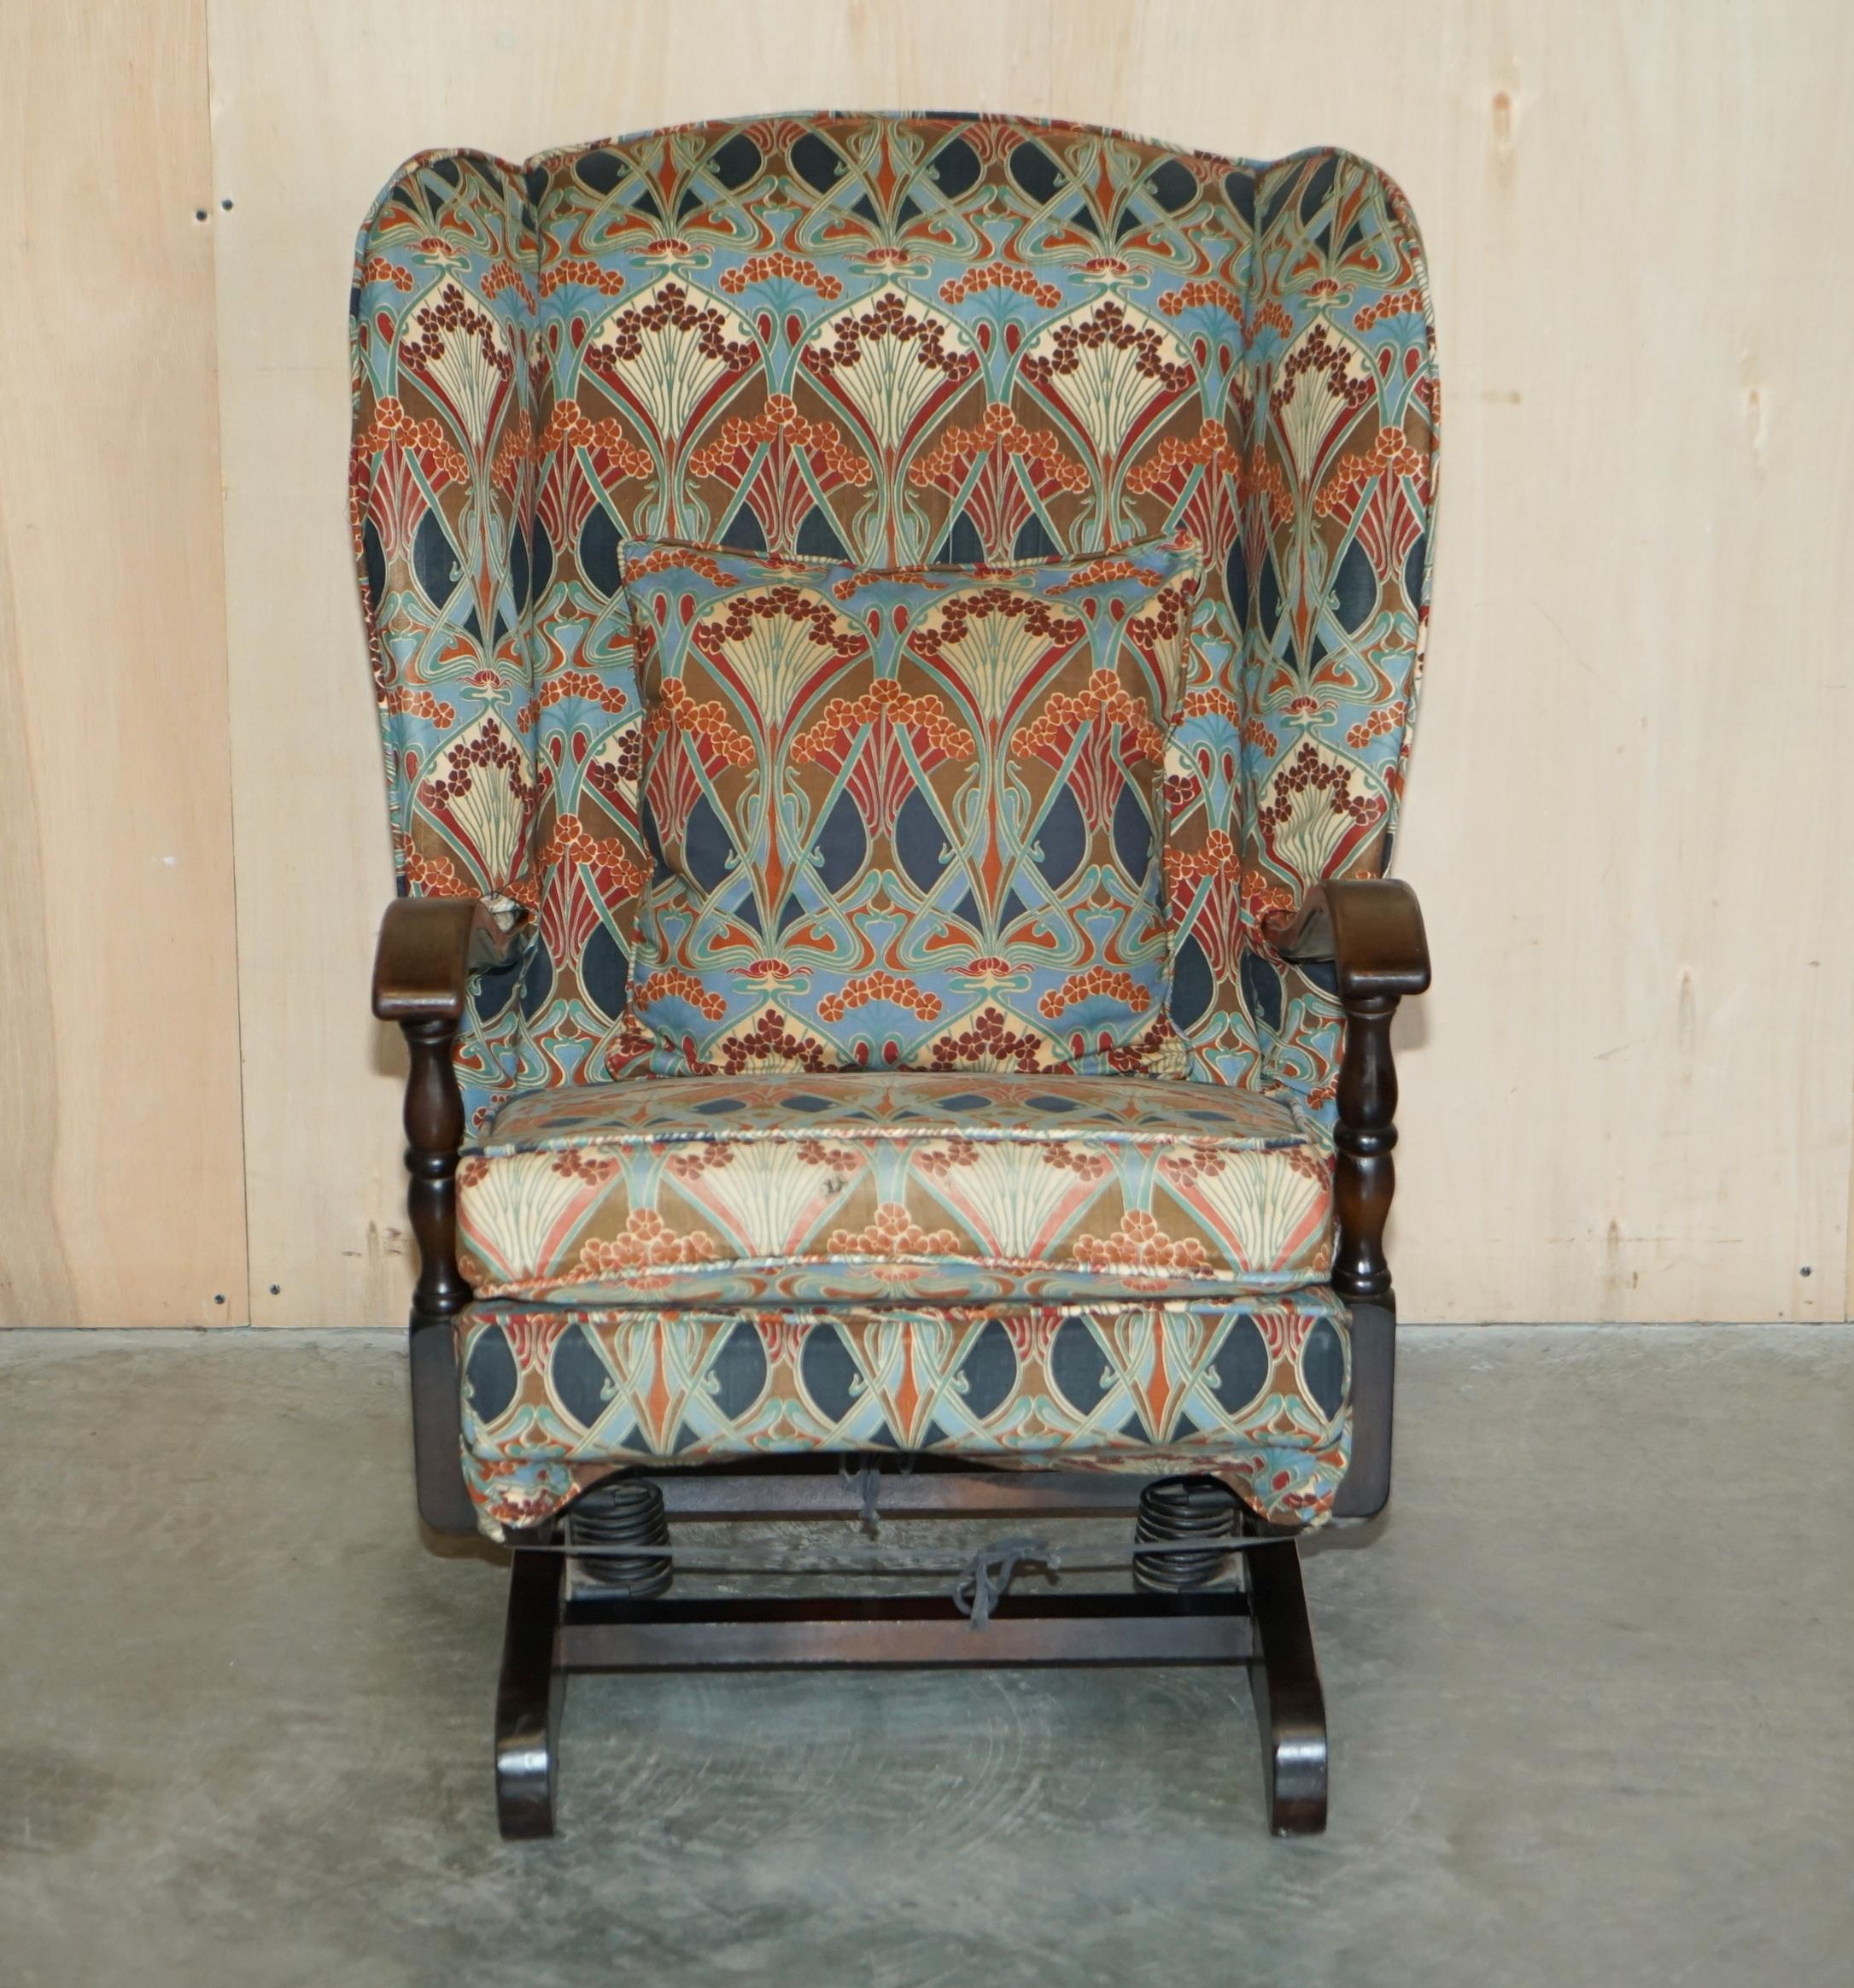 Royal House Antiques

Royal House Antiques is delighted to offer for sale absolutely stunning vintage circa 1930's English rocking armchair with removable Liberty's London Ianthe fabric cover 

Please note the delivery fee listed is just a guide, it